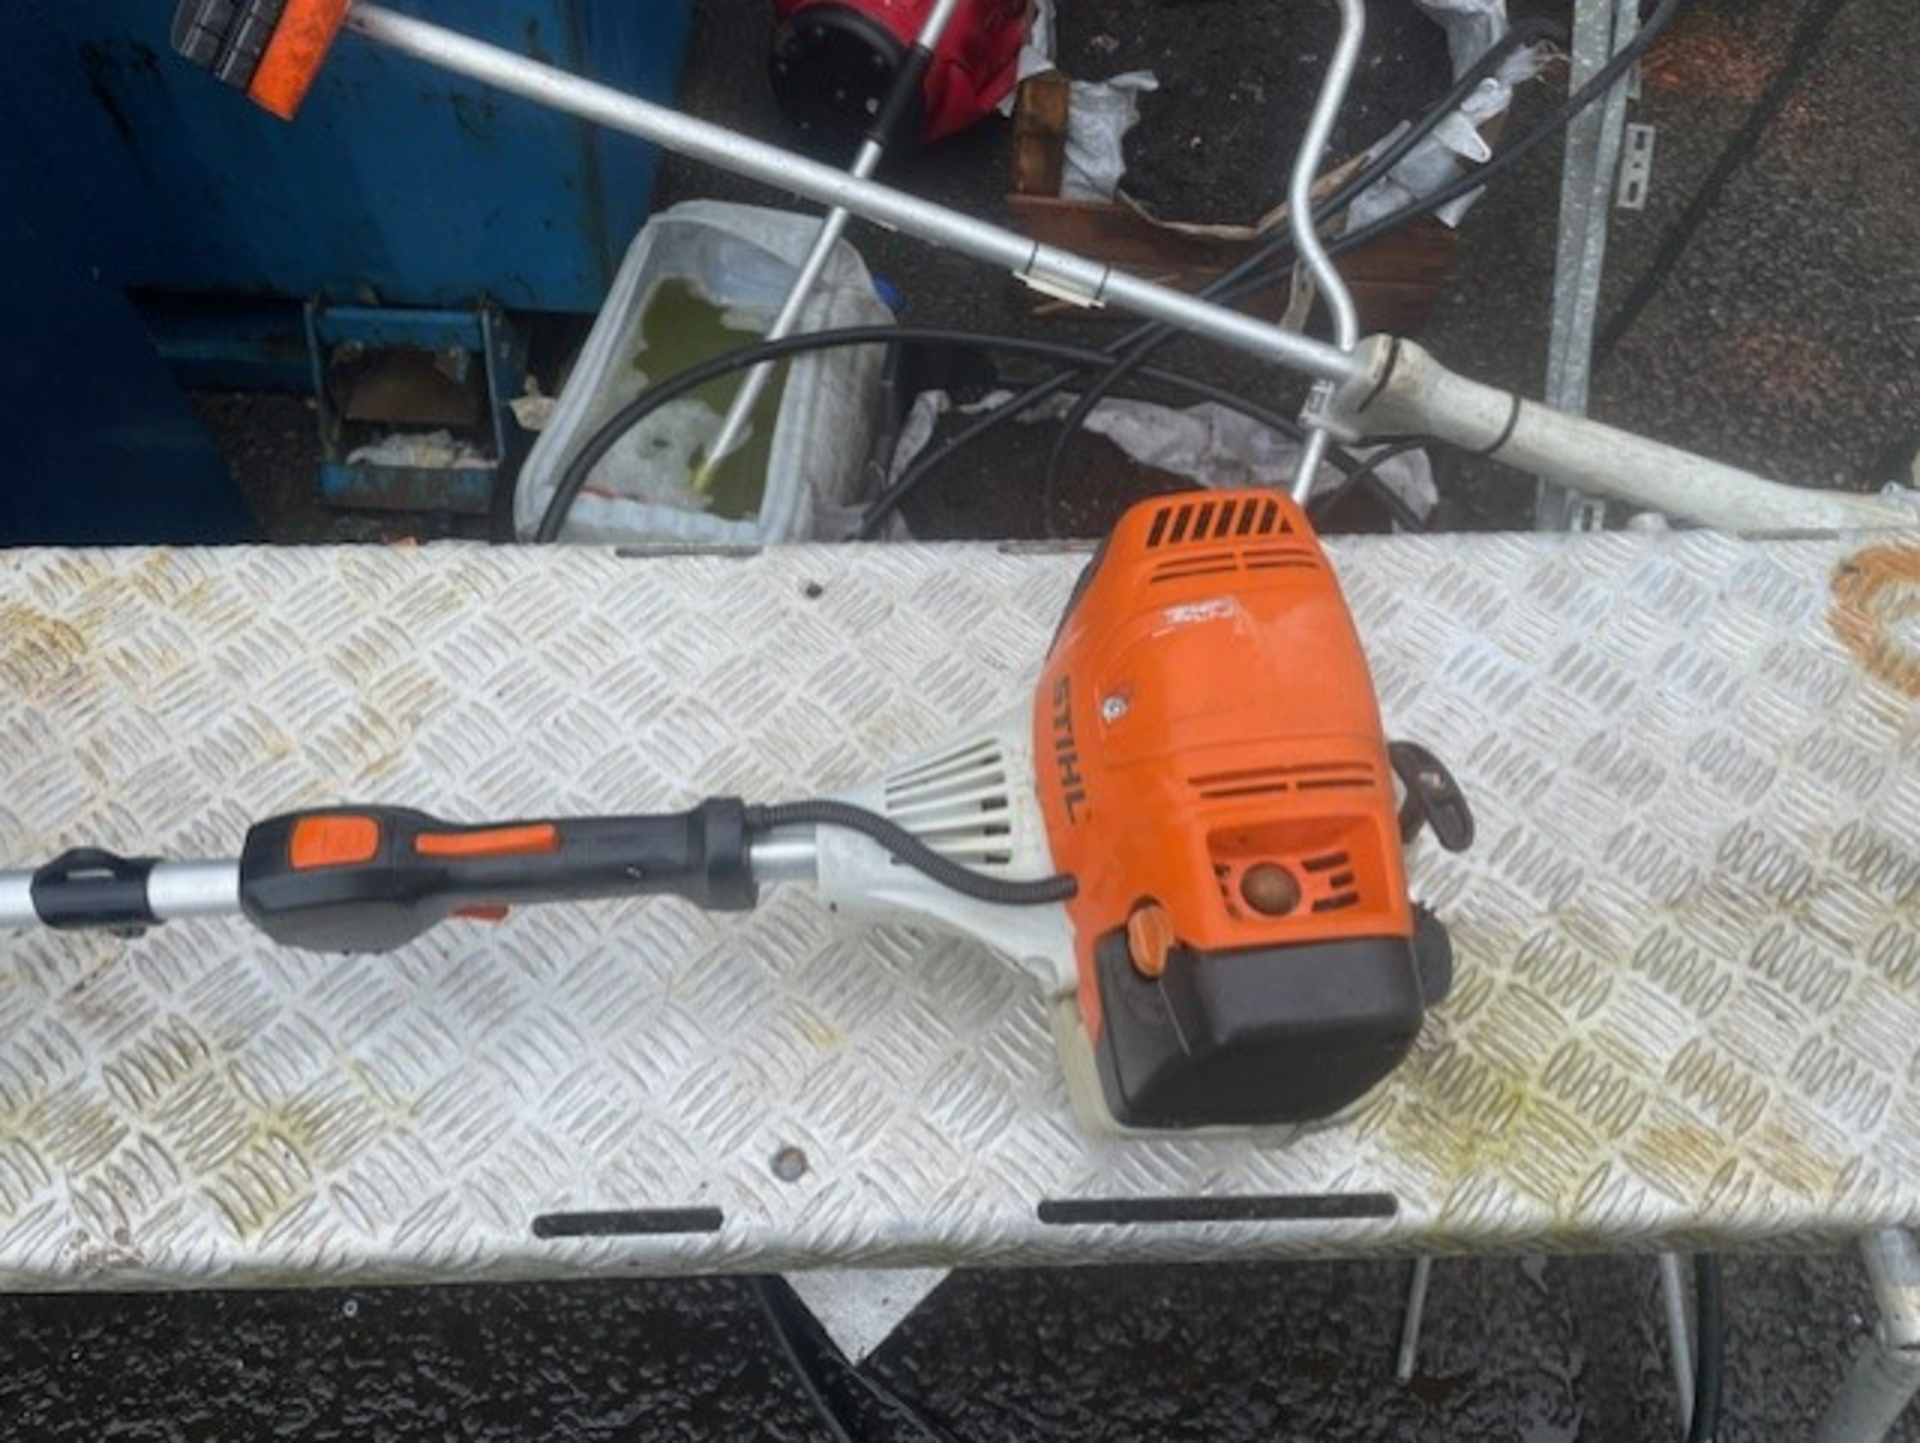 Stihl fs 111r strimmer good runner as per video sold with no warranty at all video says it all - Bild 2 aus 4